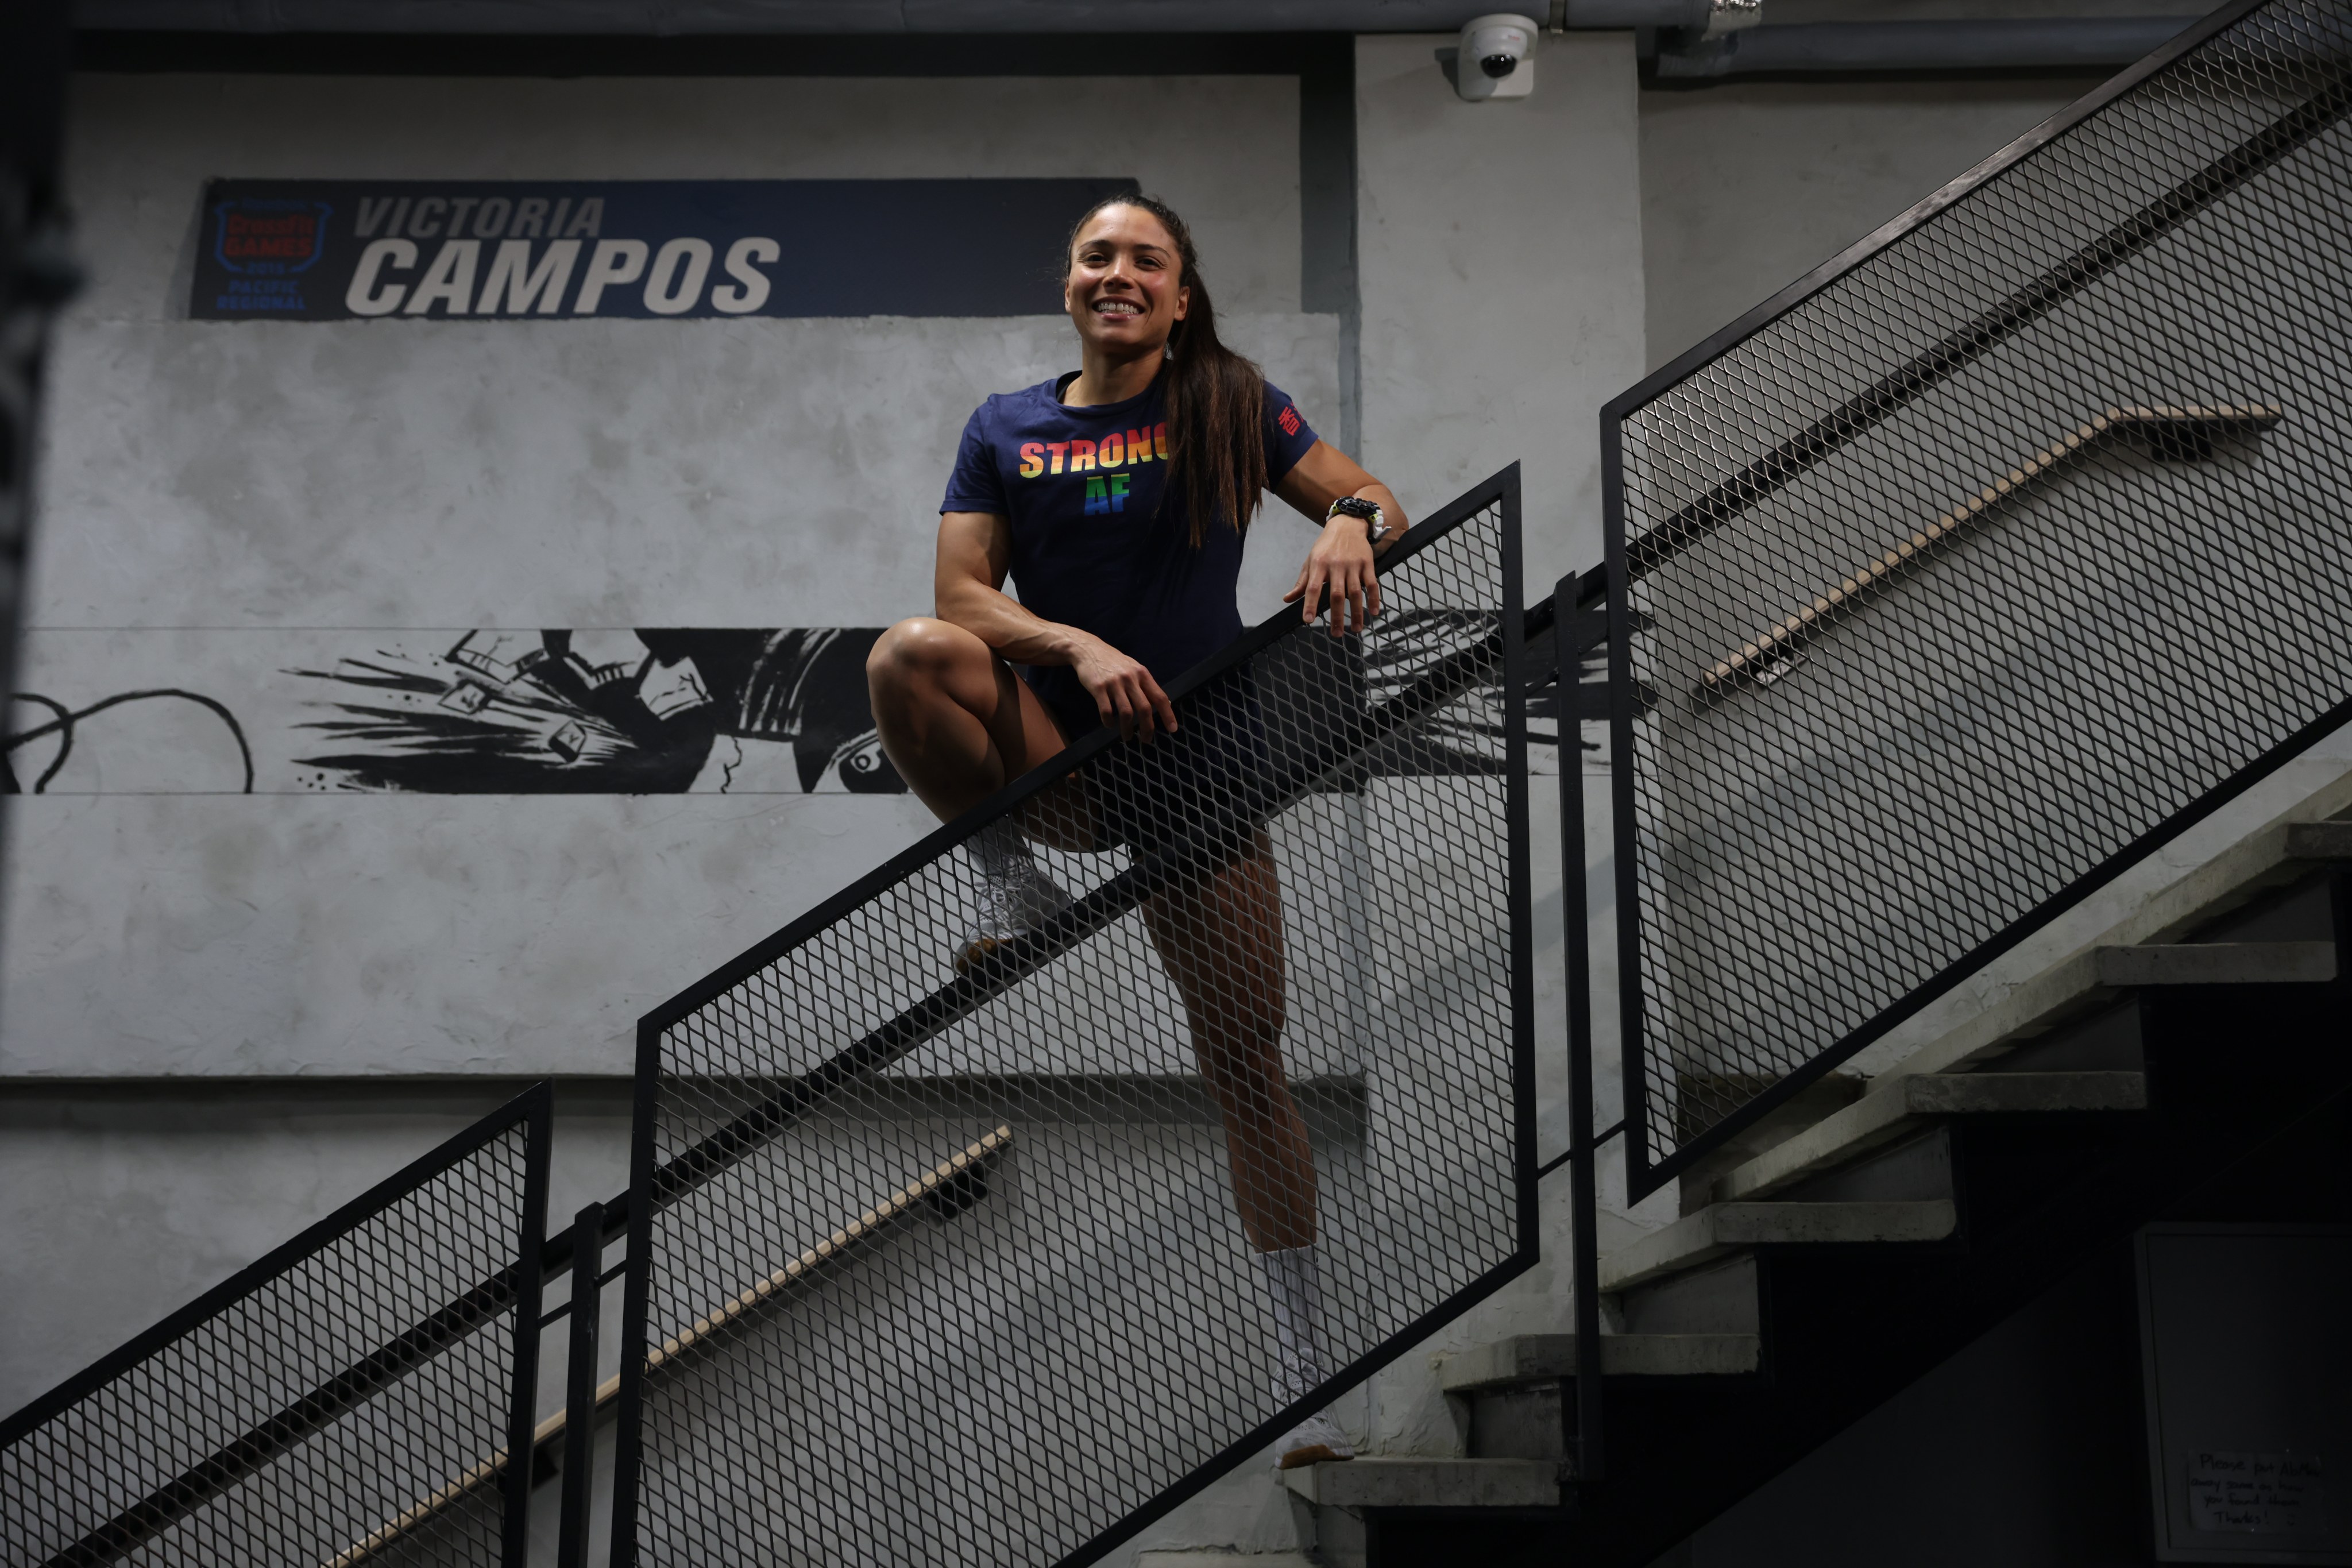 Victoria Campos is ready to roll and book her ticket to the 2021 CrossFit Games. Photo: Nora Tam